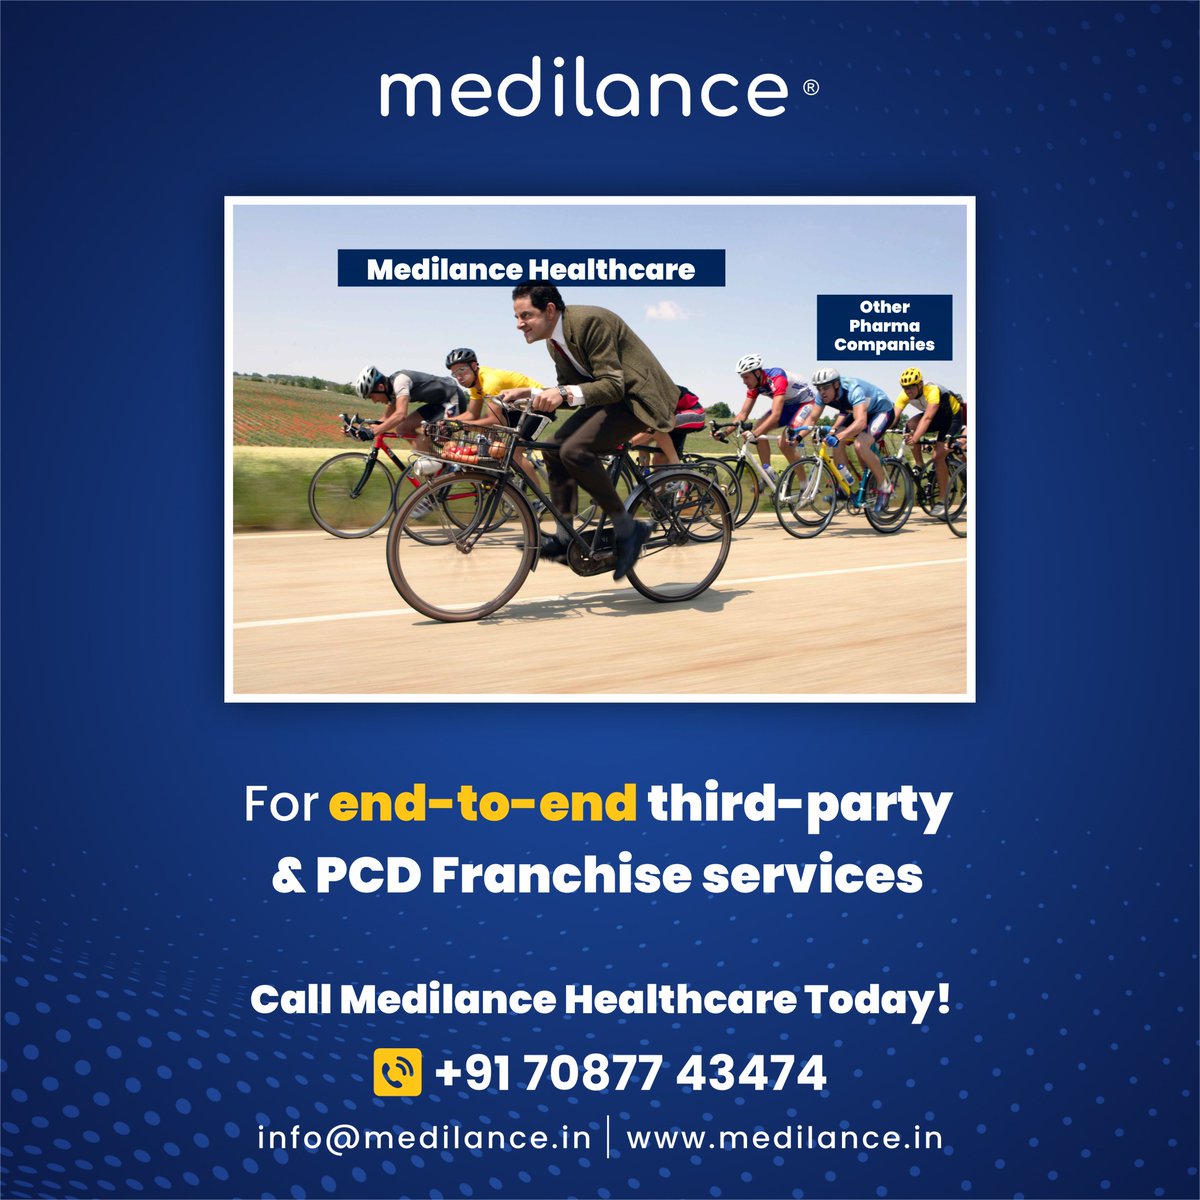 Looking for comprehensive third-party and #PCDfranchiseservices? Look no further than #MedilanceHealthcare! 
☎️7087743474
medilance.in
 #Healthcare #thirdpartymanufacturing #pharmaproducts #pharma #pharmameme #pharmamemes #pharmaceuticalcompany #pcdfranchisebusiness